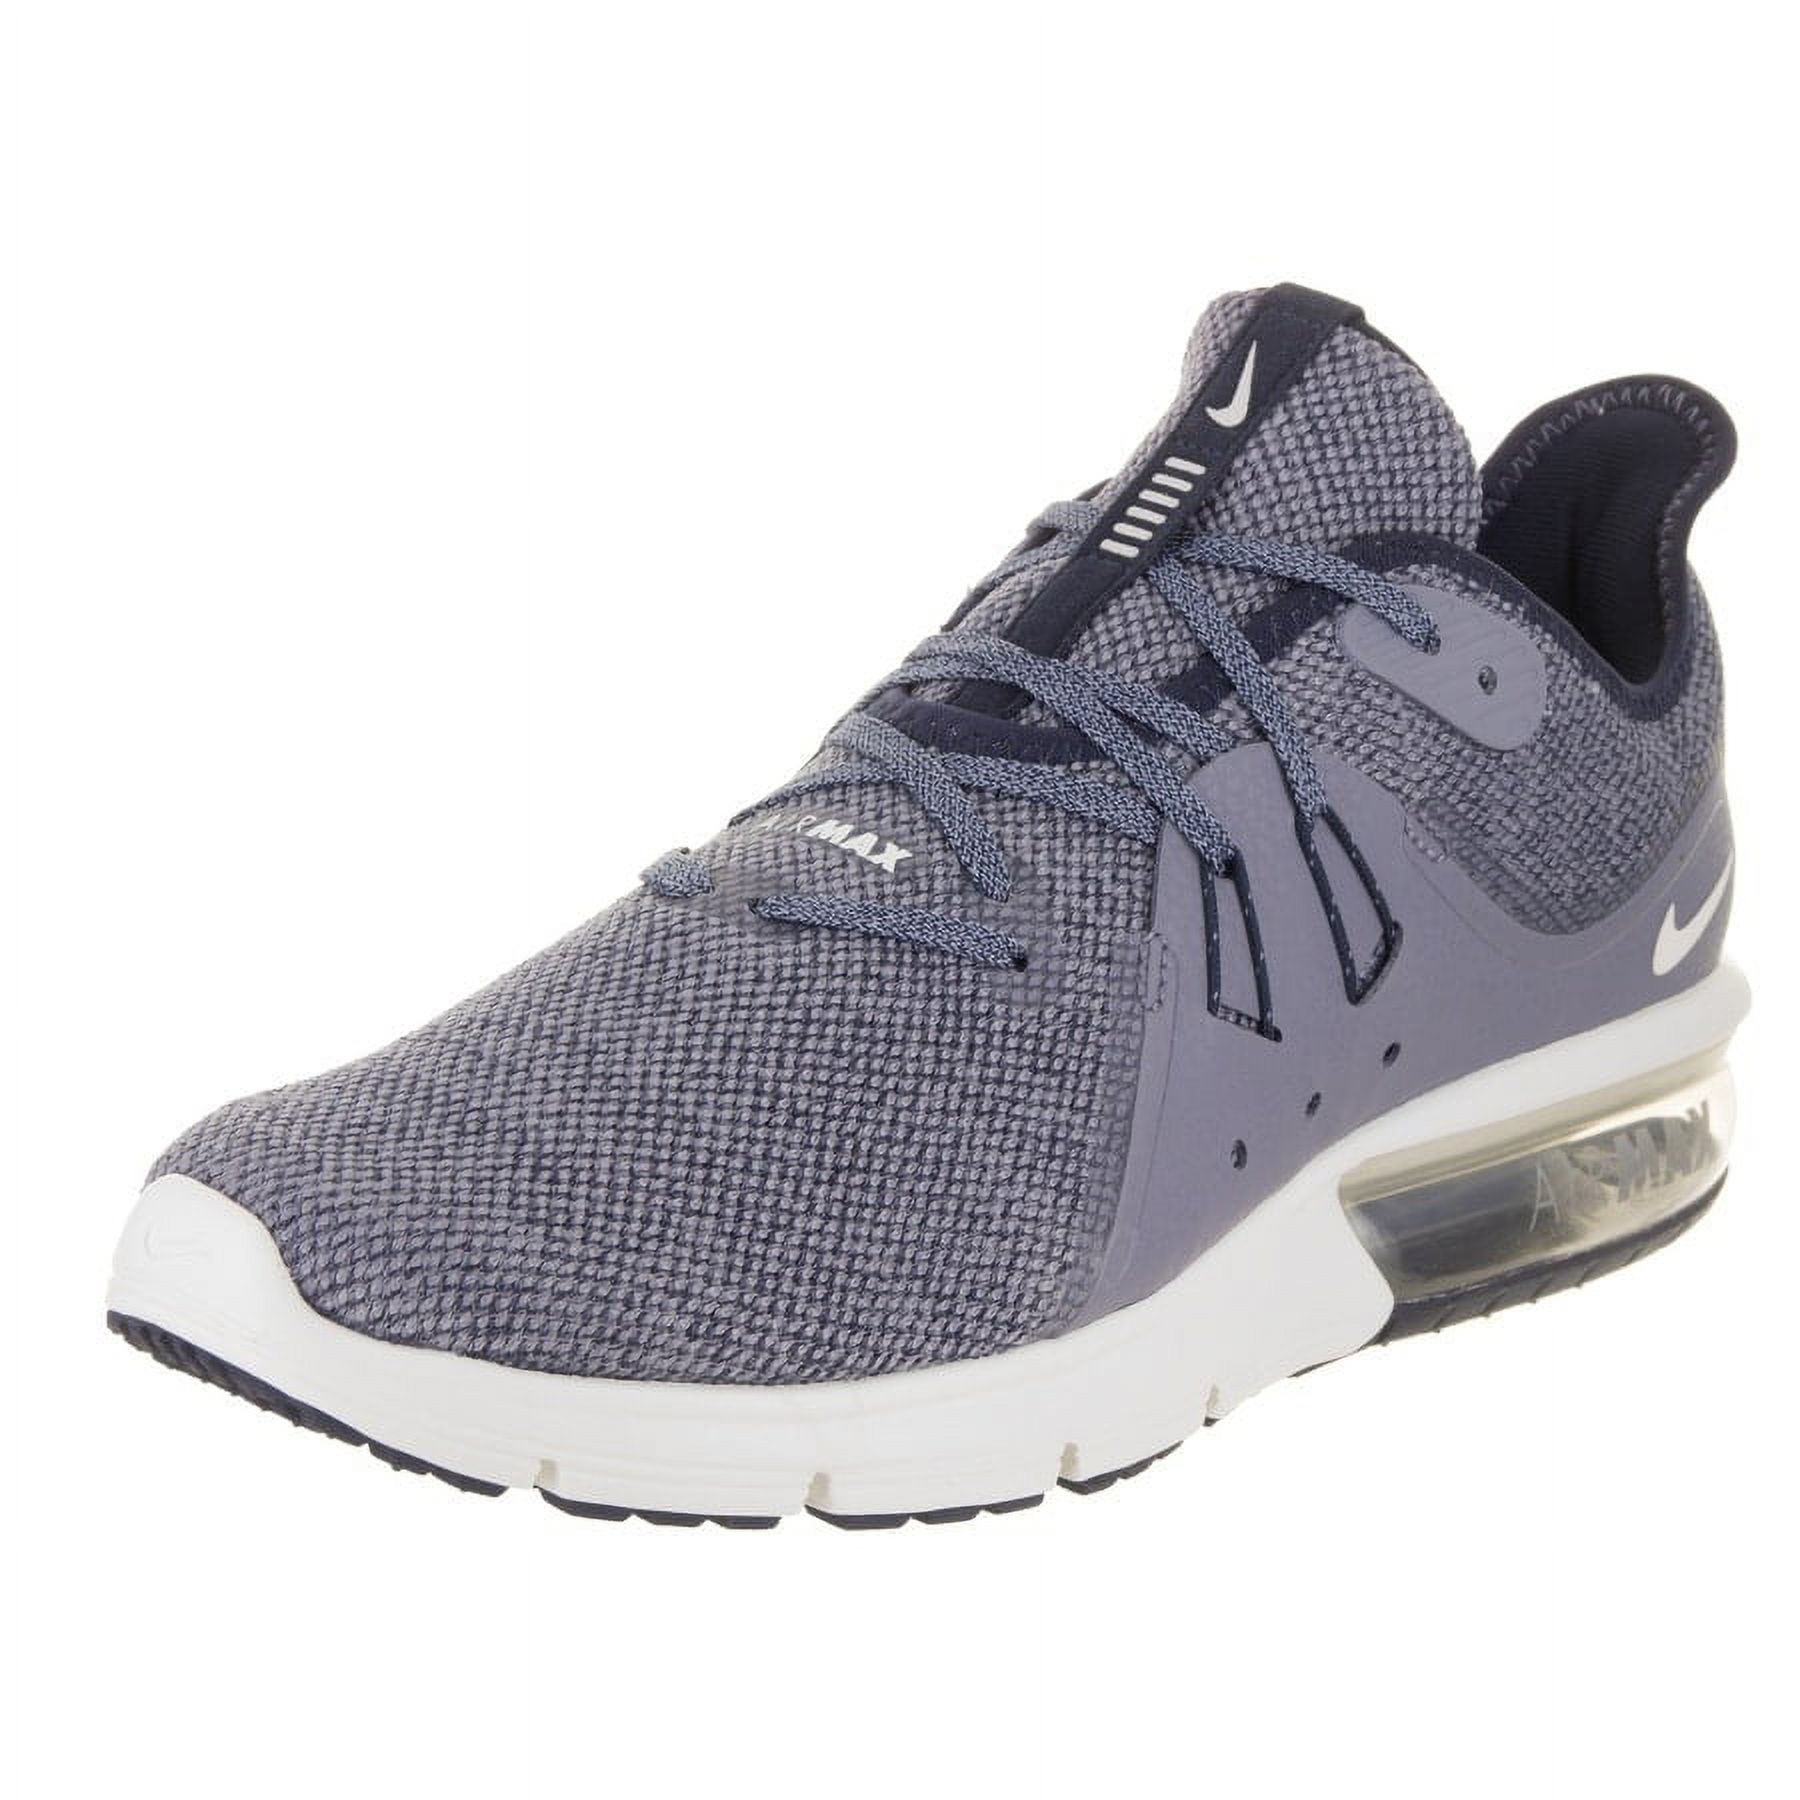 Nike Men's Air Max Sequent 3 Running Shoe - image 1 of 5